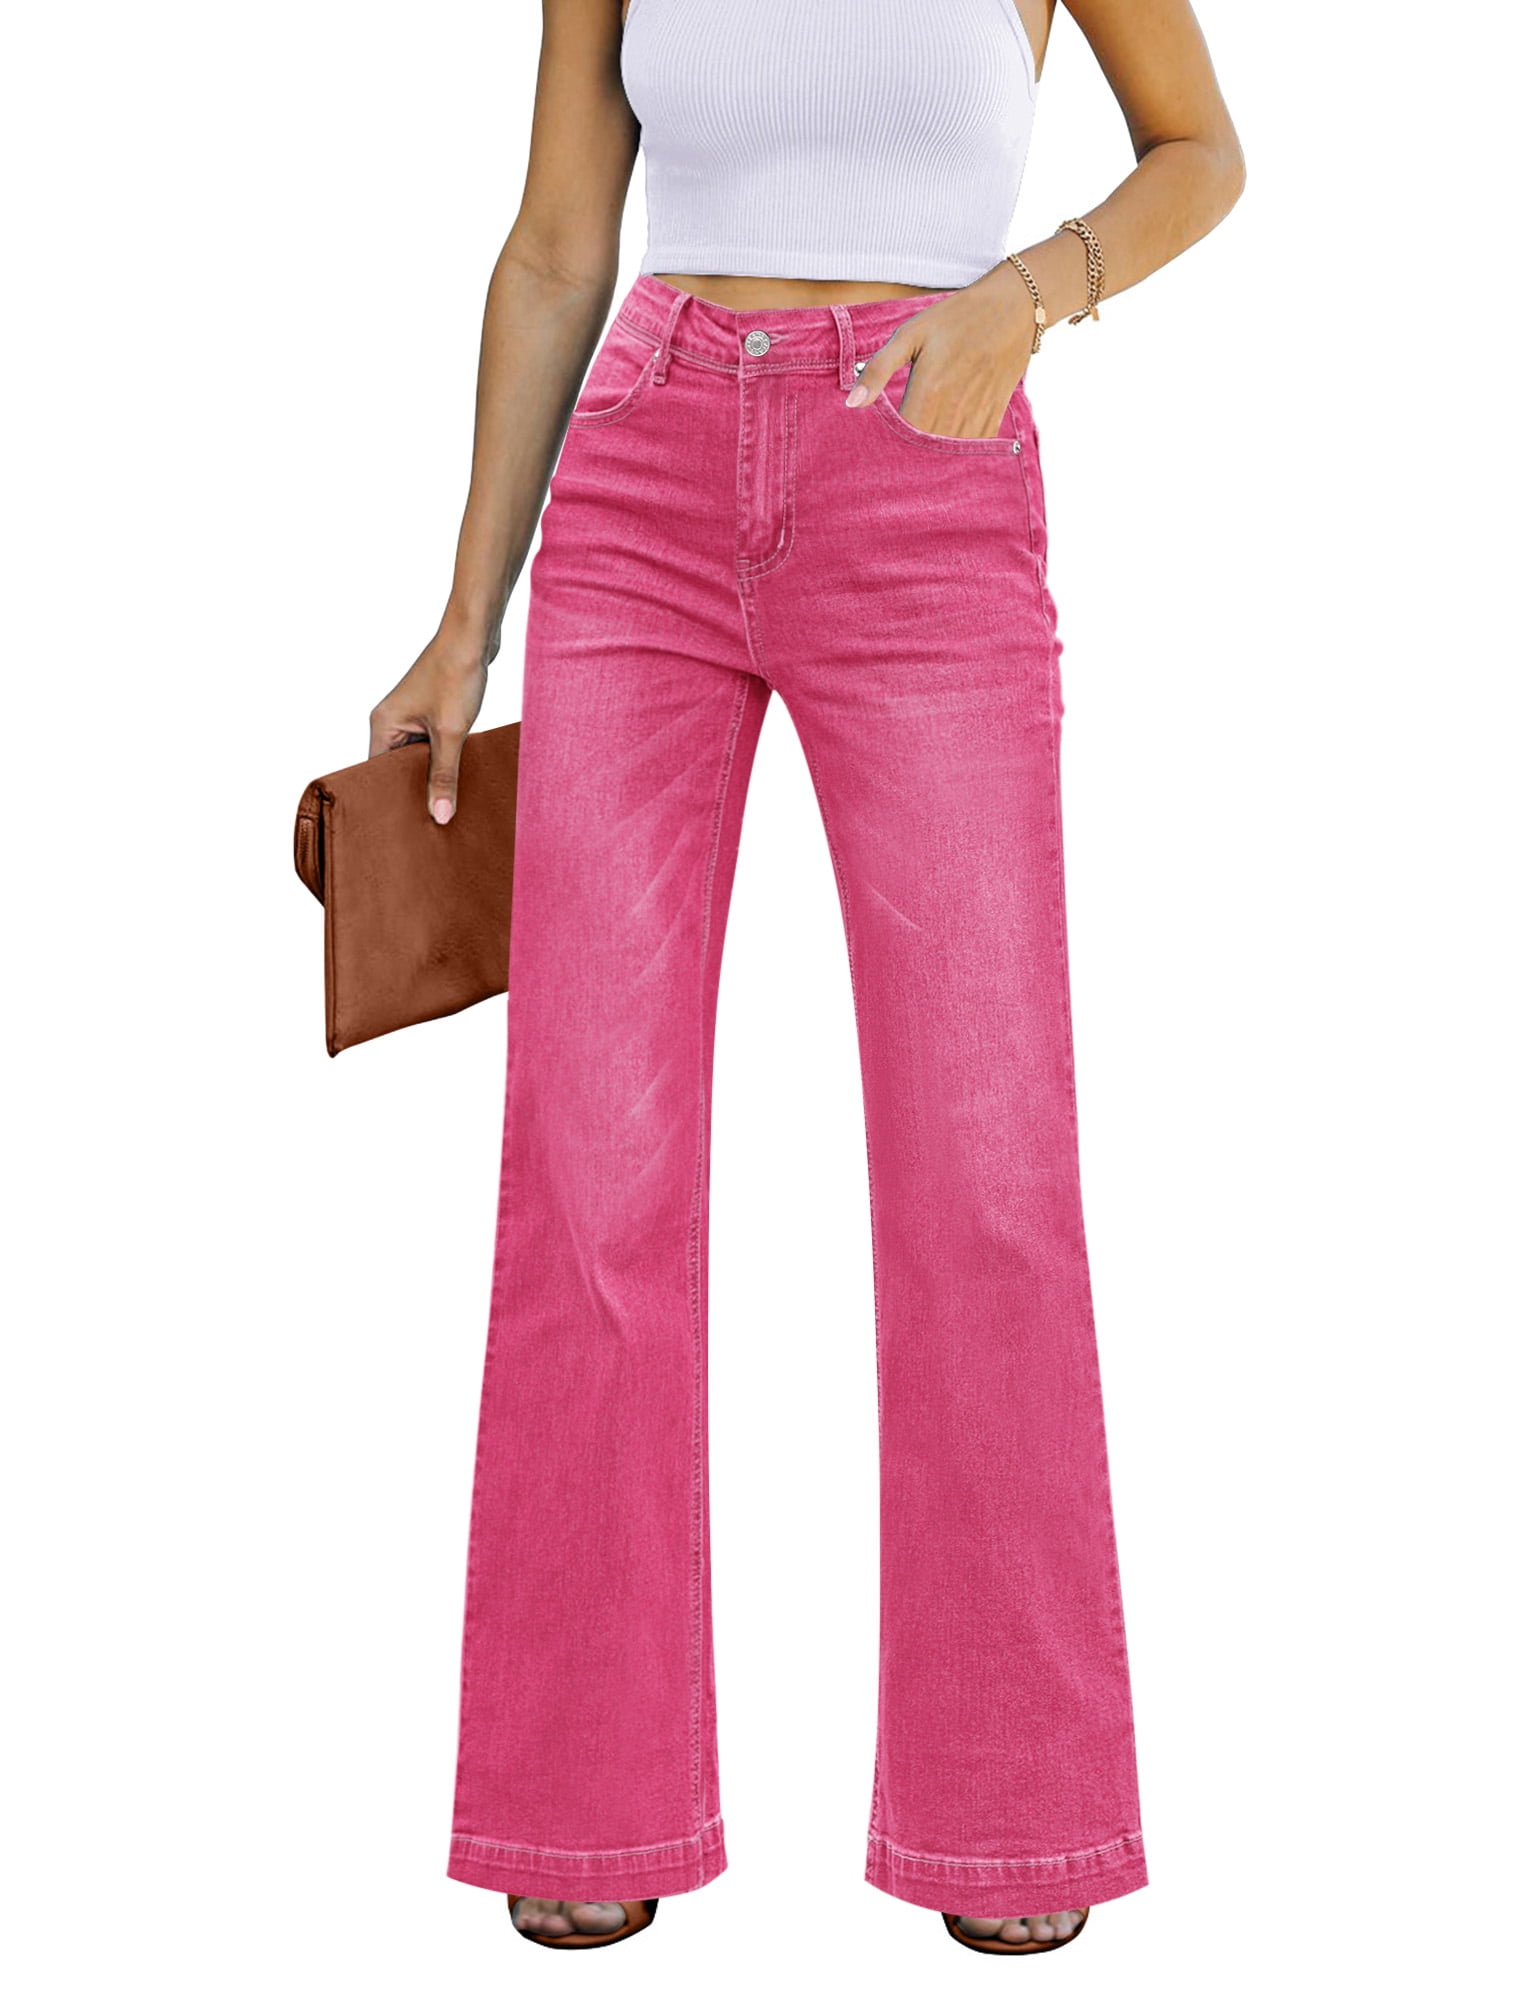 Vetinee Baggy Pants Front Plunge Pants for Women Work Casual